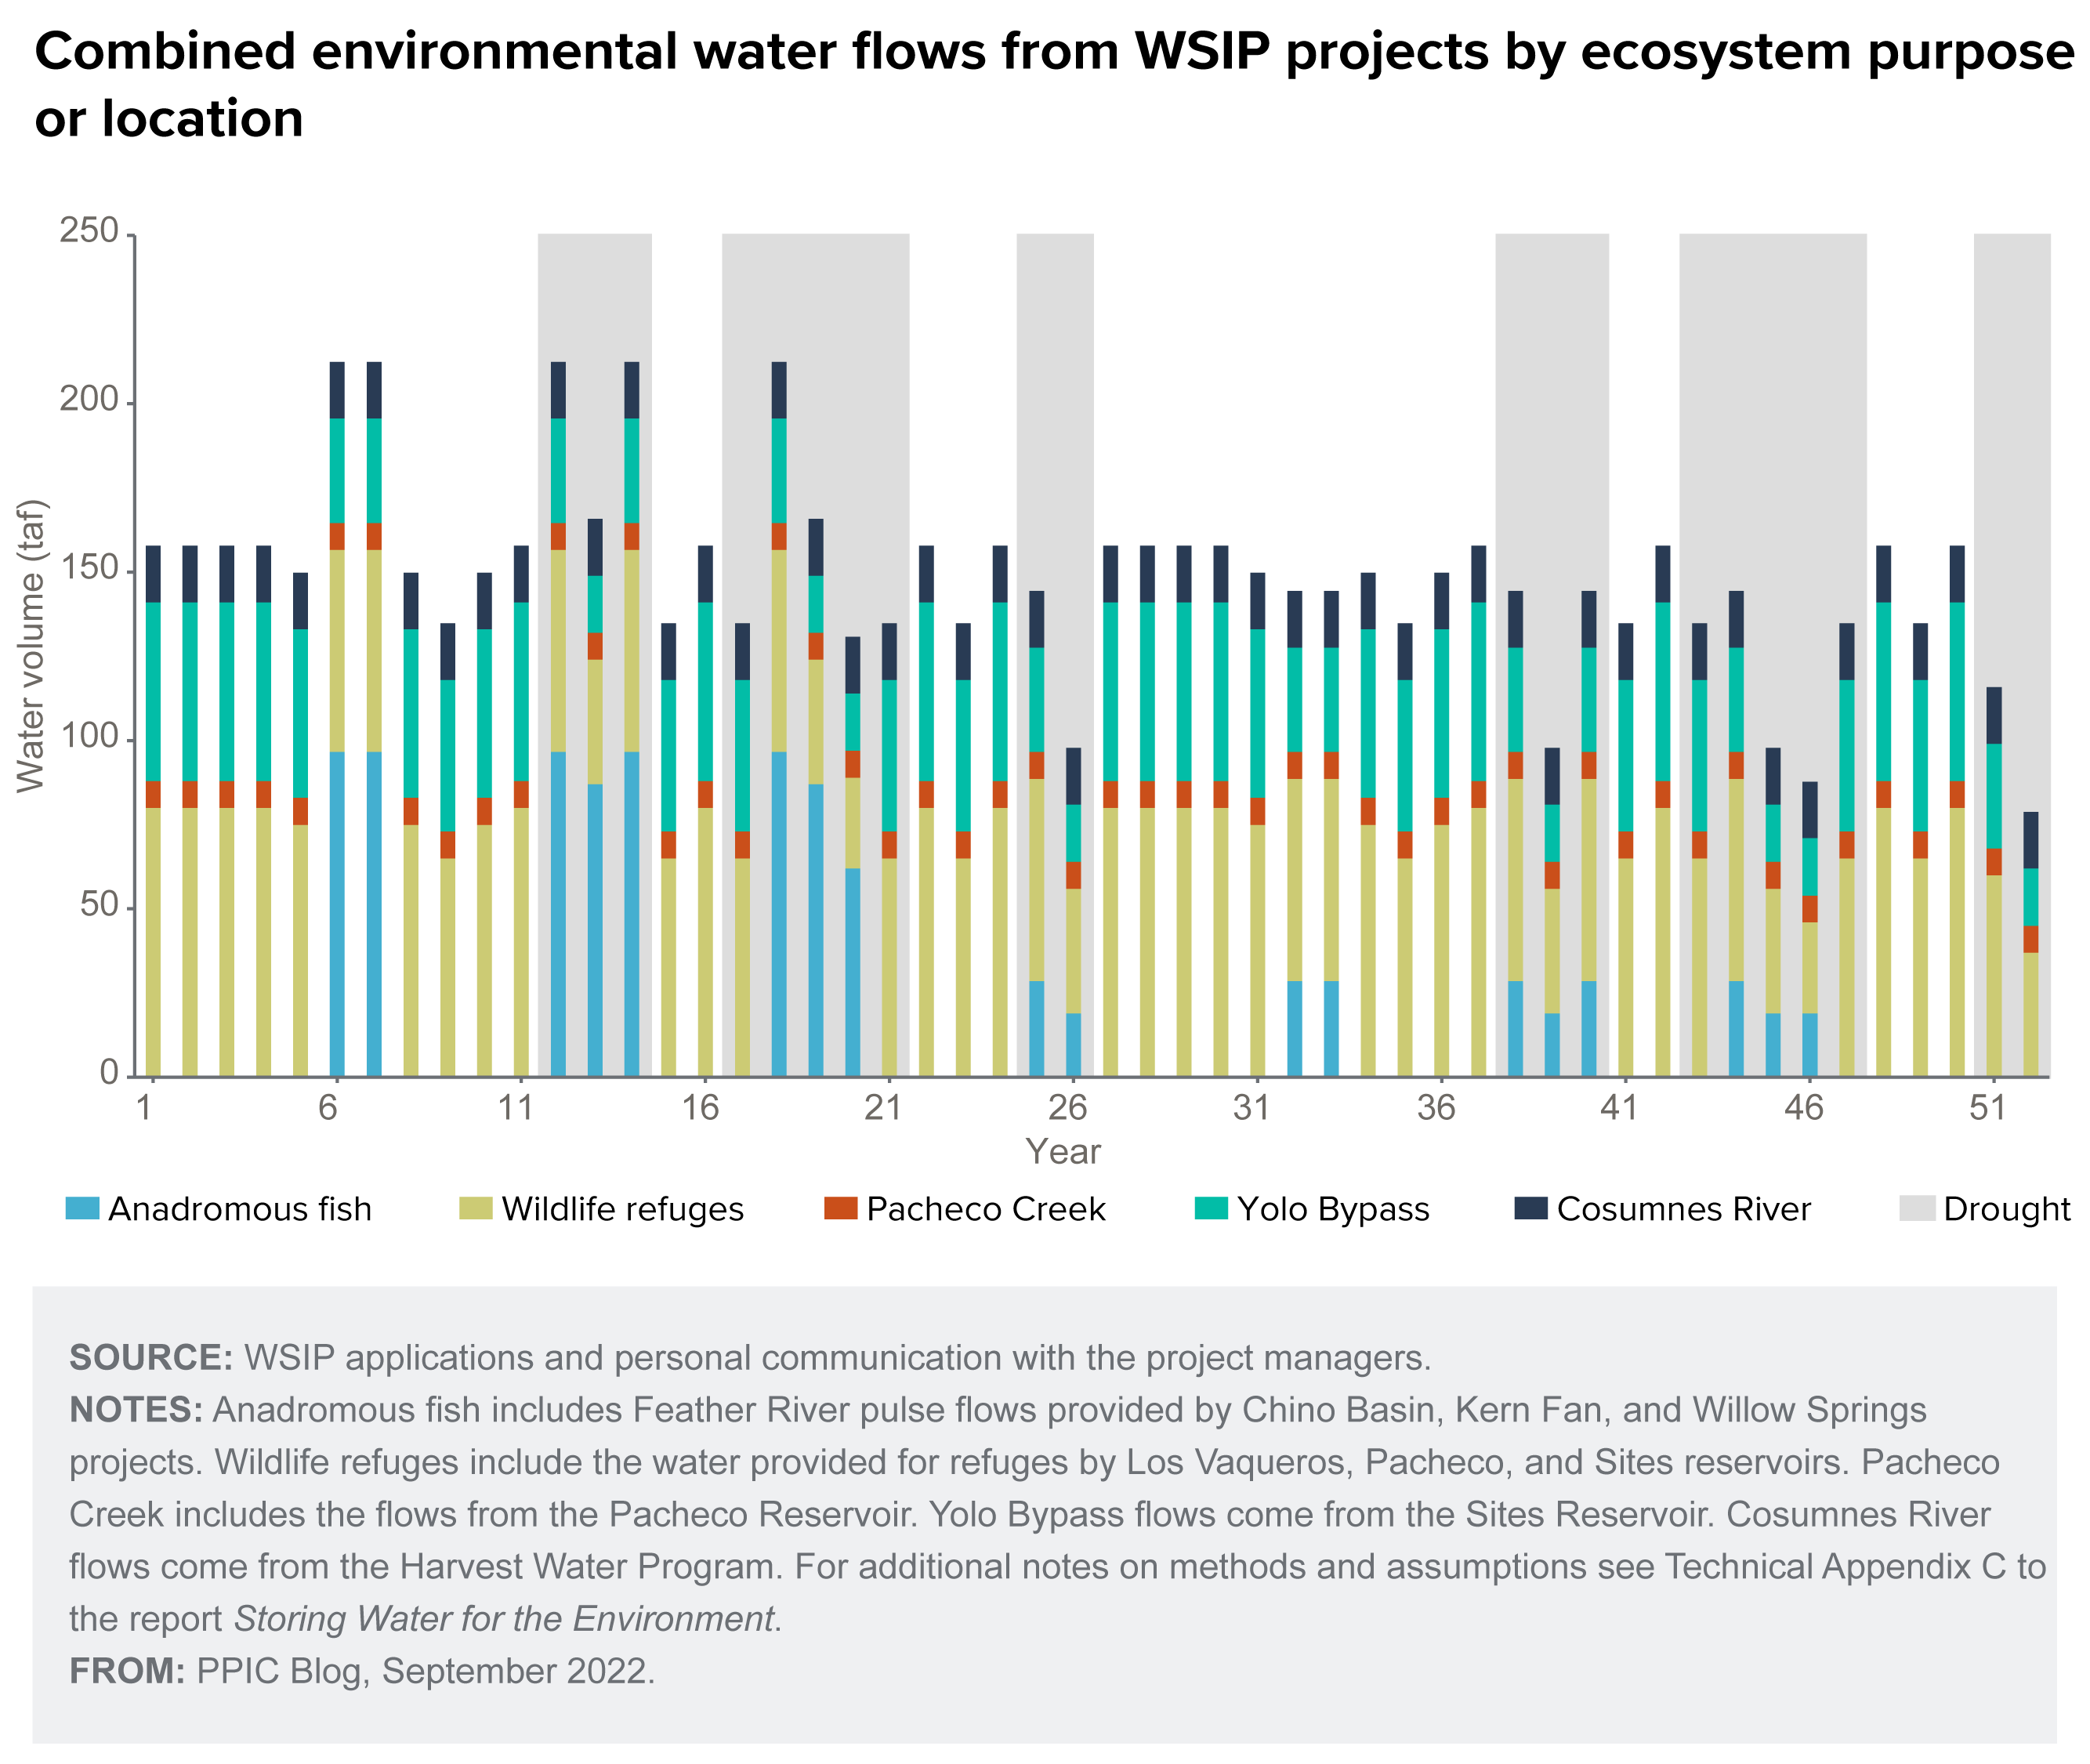 figure - Combined environmental water flows from WSIP projects by ecosystem purpose or location